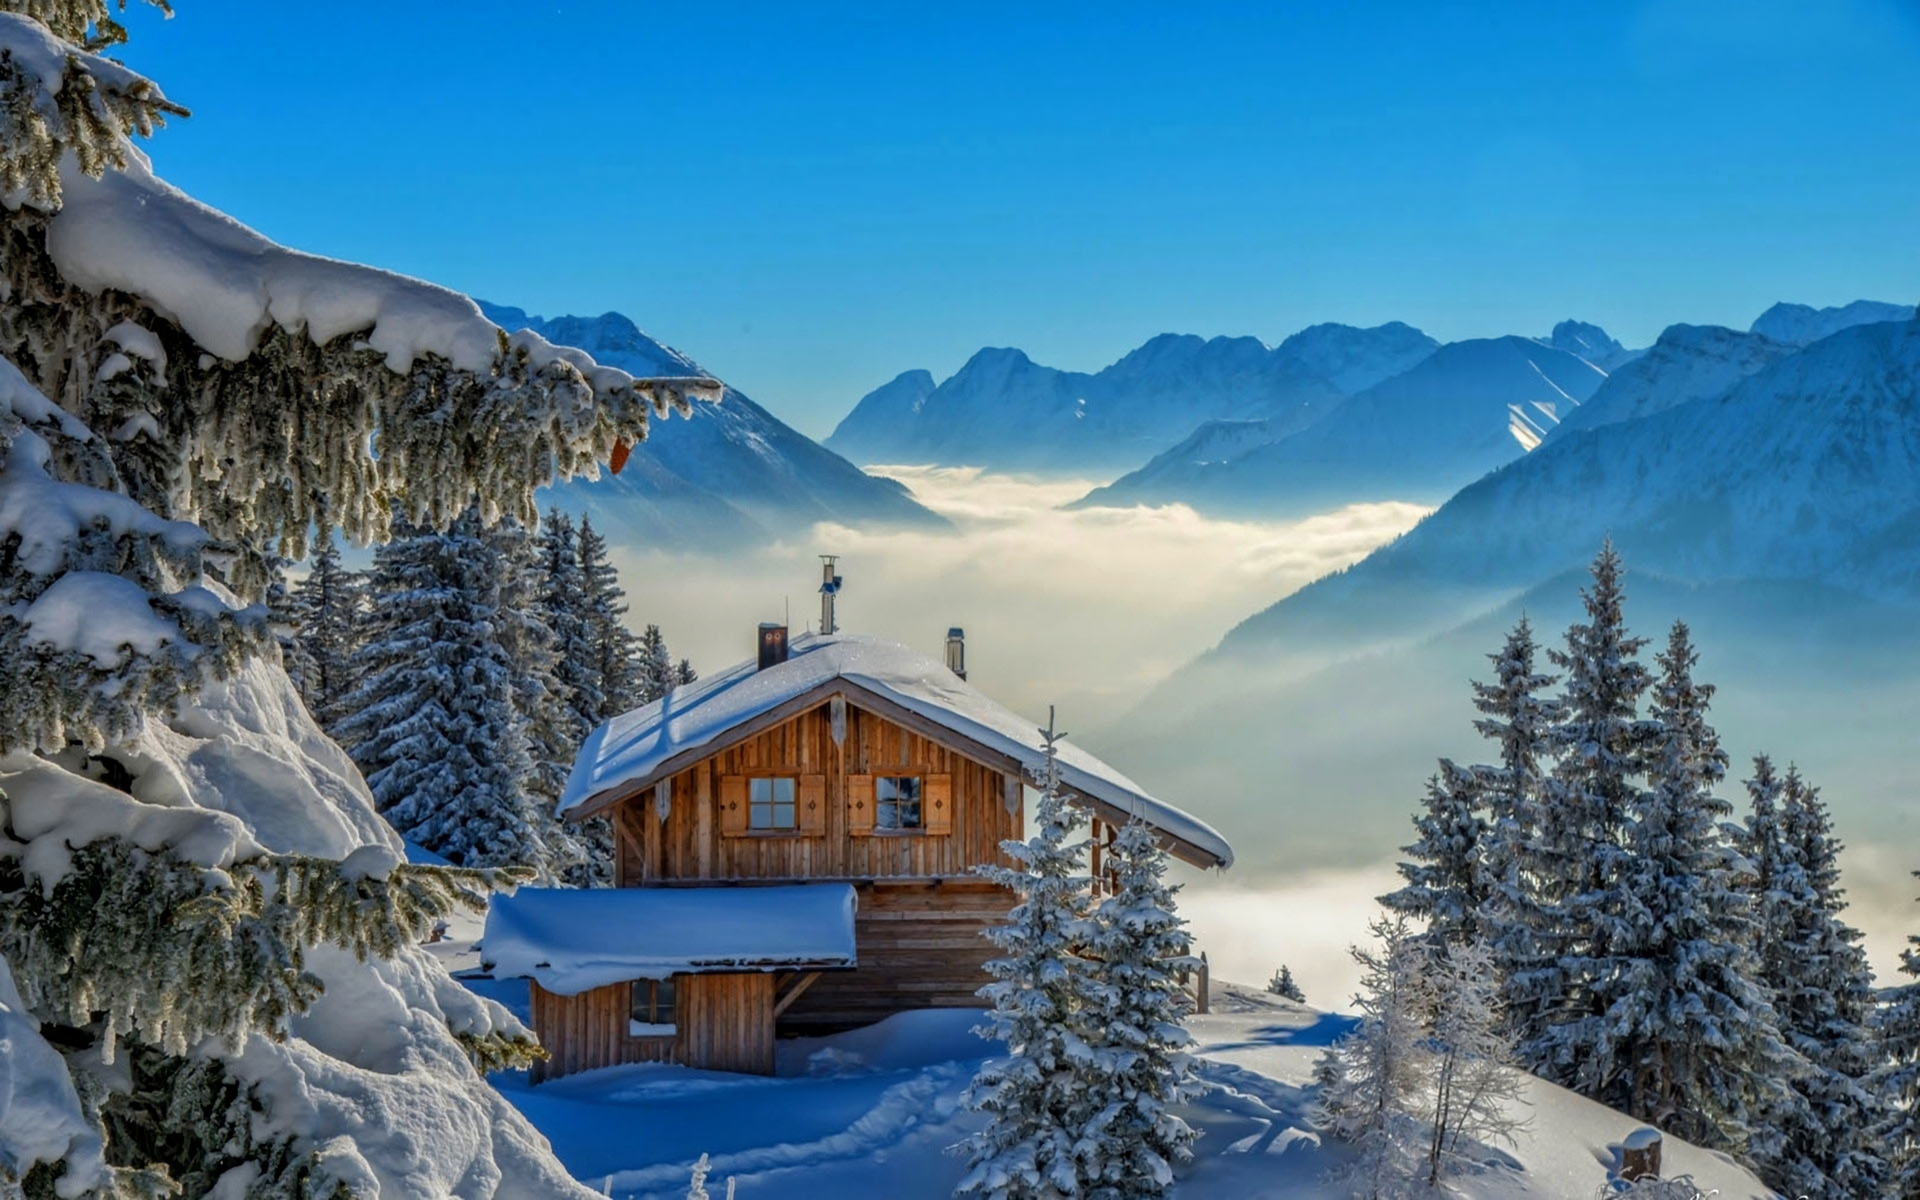 Cabins in Winter Mountains